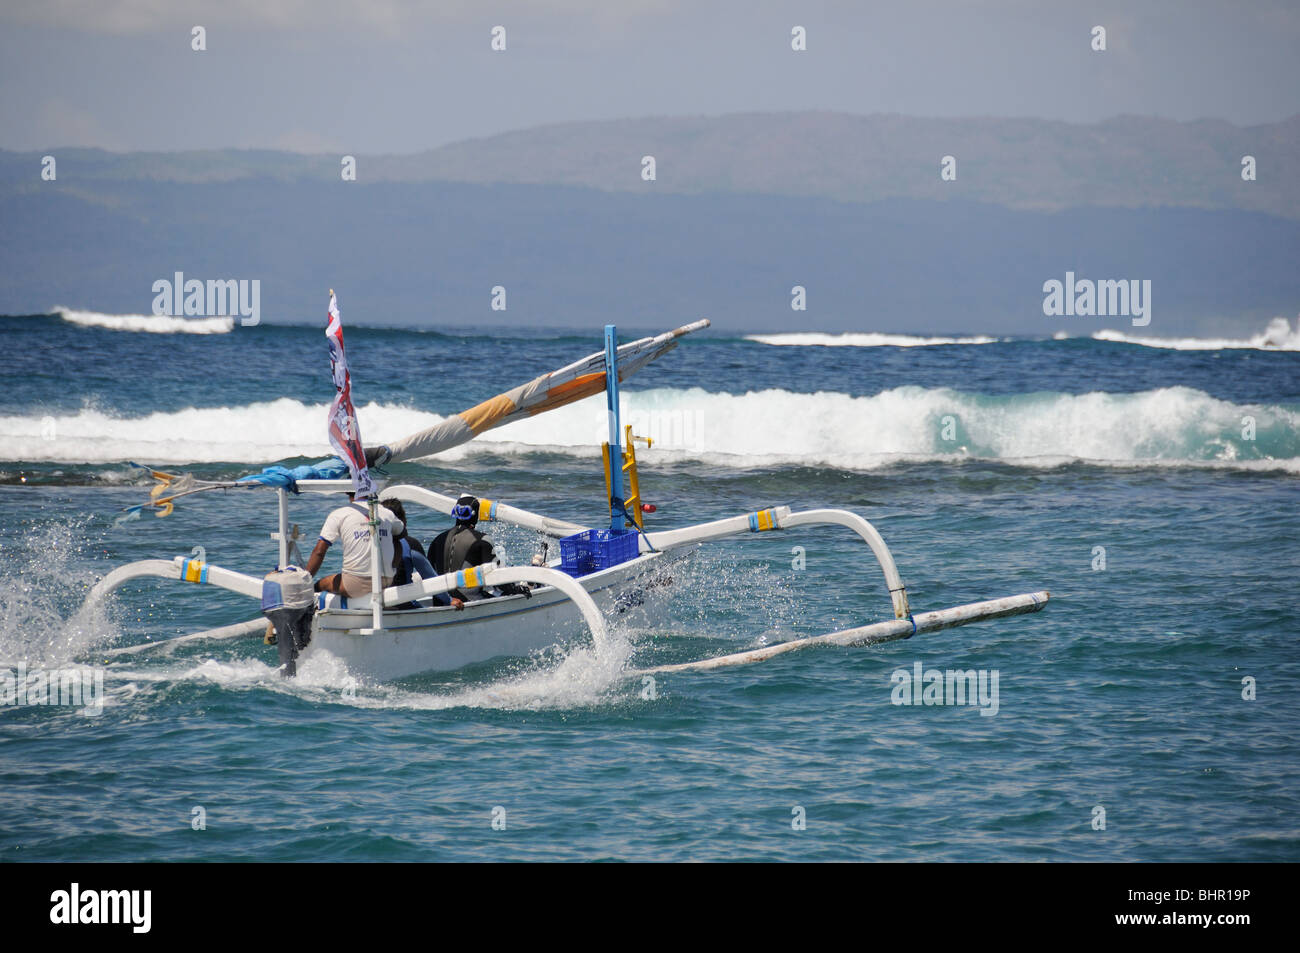 Outrigger-Canoe riding against big waves, Bali, Indonesia, Indo-Pacific Ocean Stock Photo